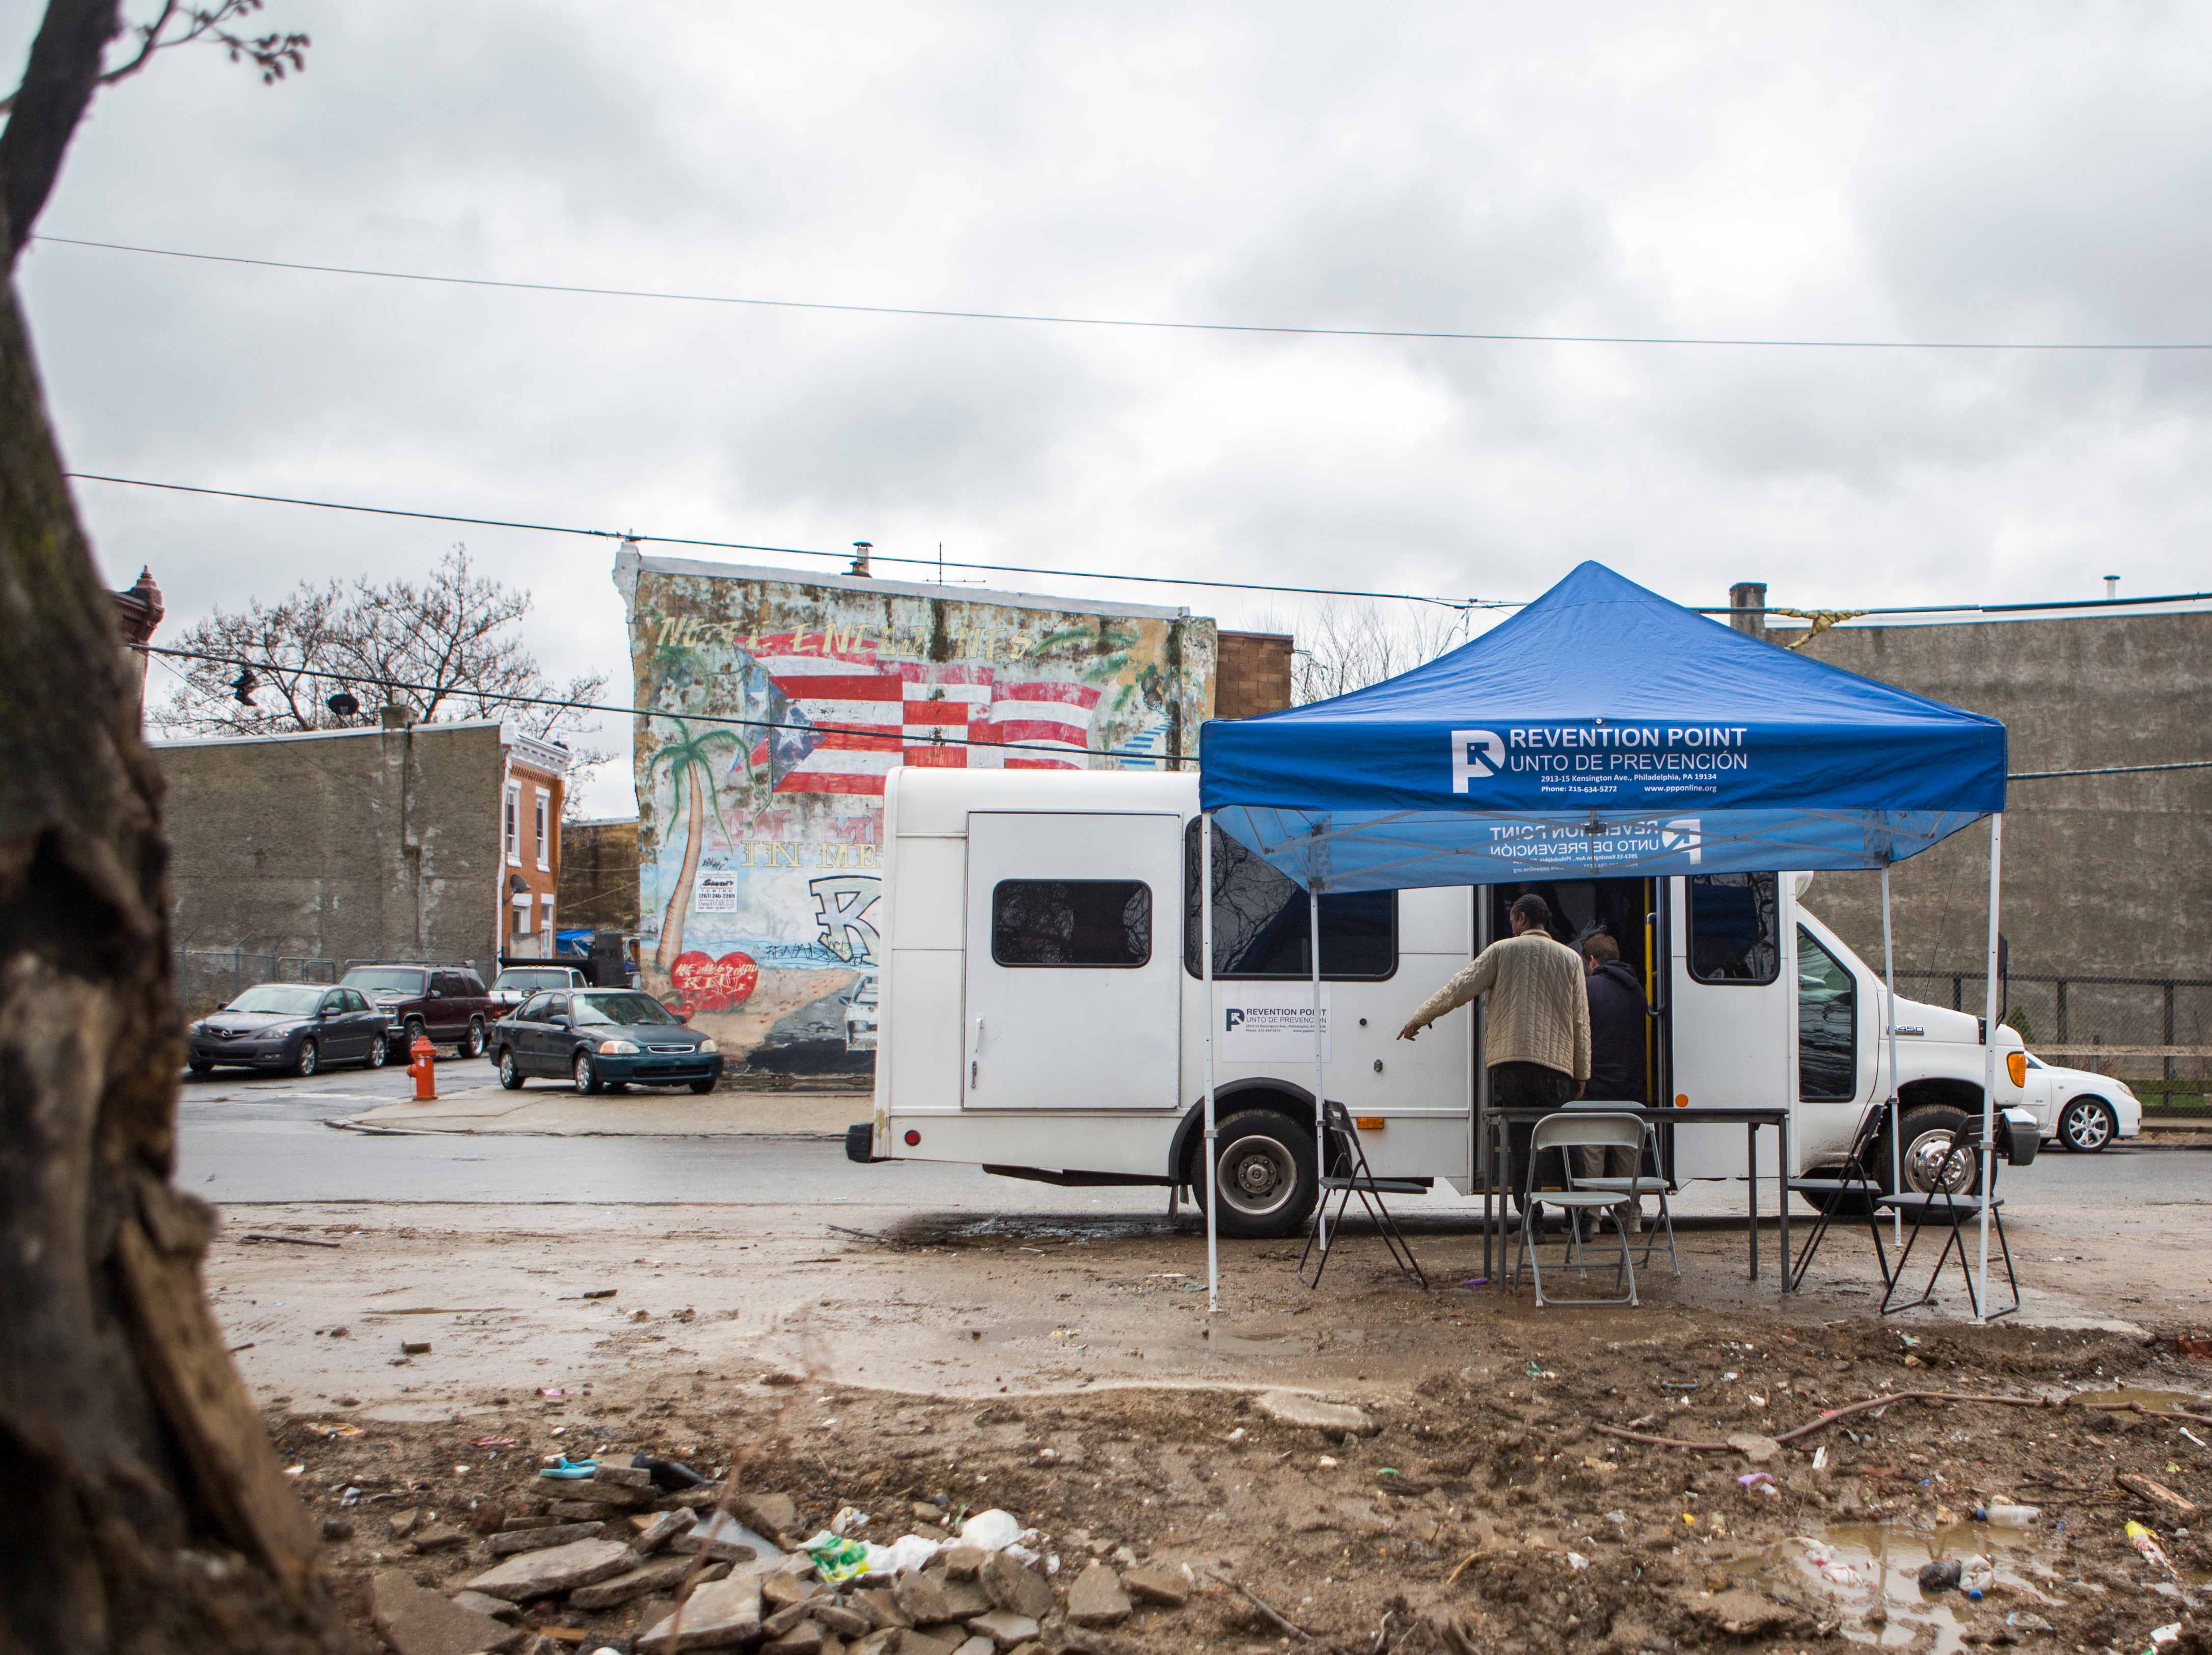 Prevention Point: a social services organization in Philadelphia, sets up a mobile wound care clinic each week to tend to homeless residents in the Kensington area. (Jessica Kourkounis/For Keystone Crossroads)